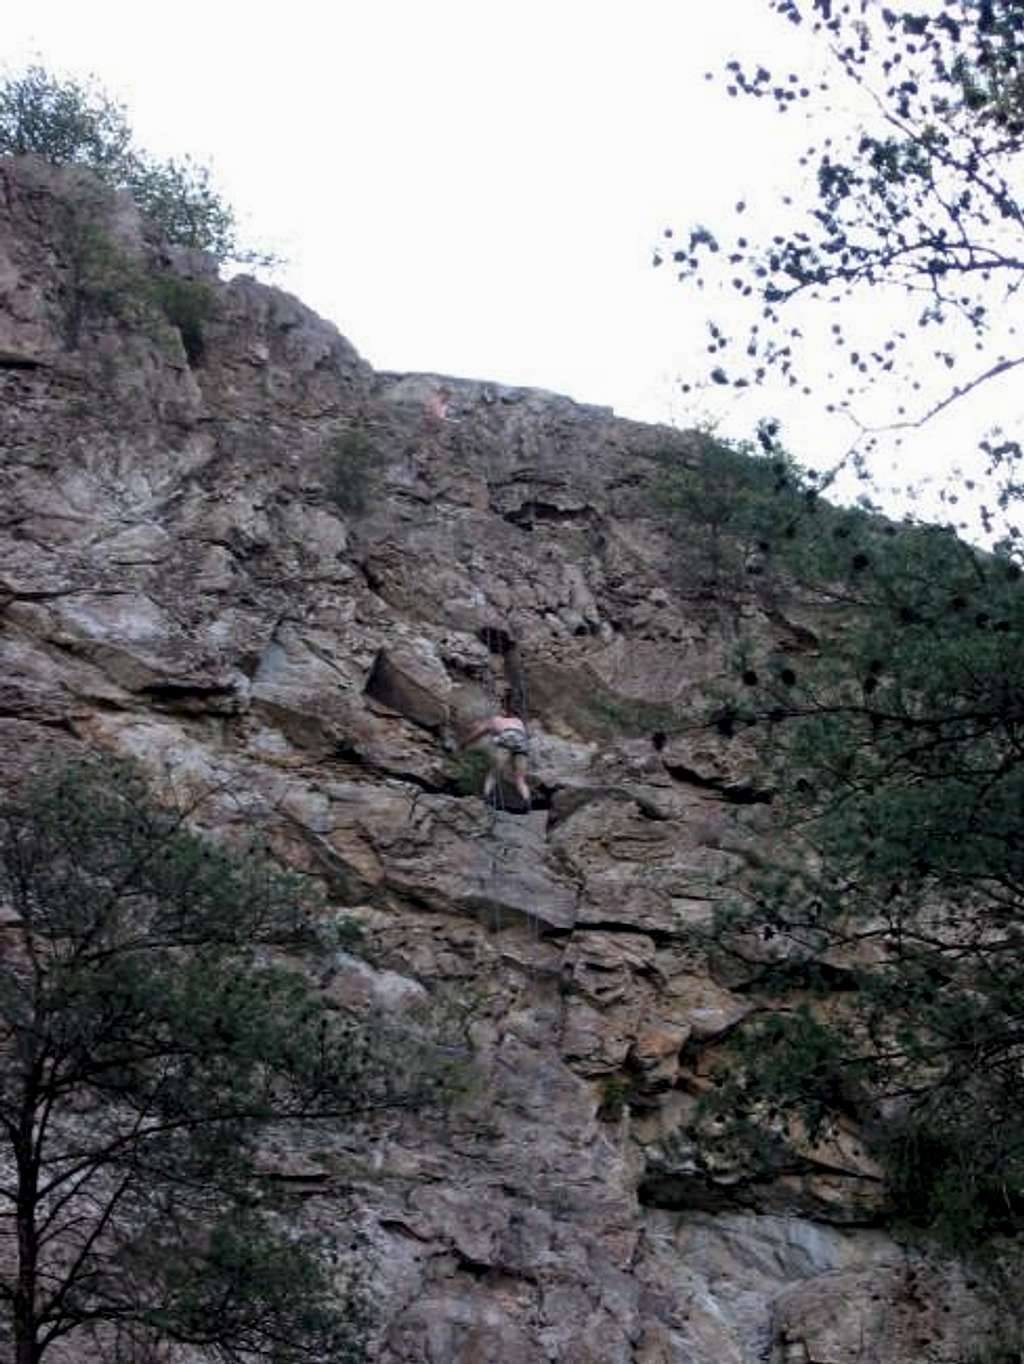 Climber on one of the cliffs...